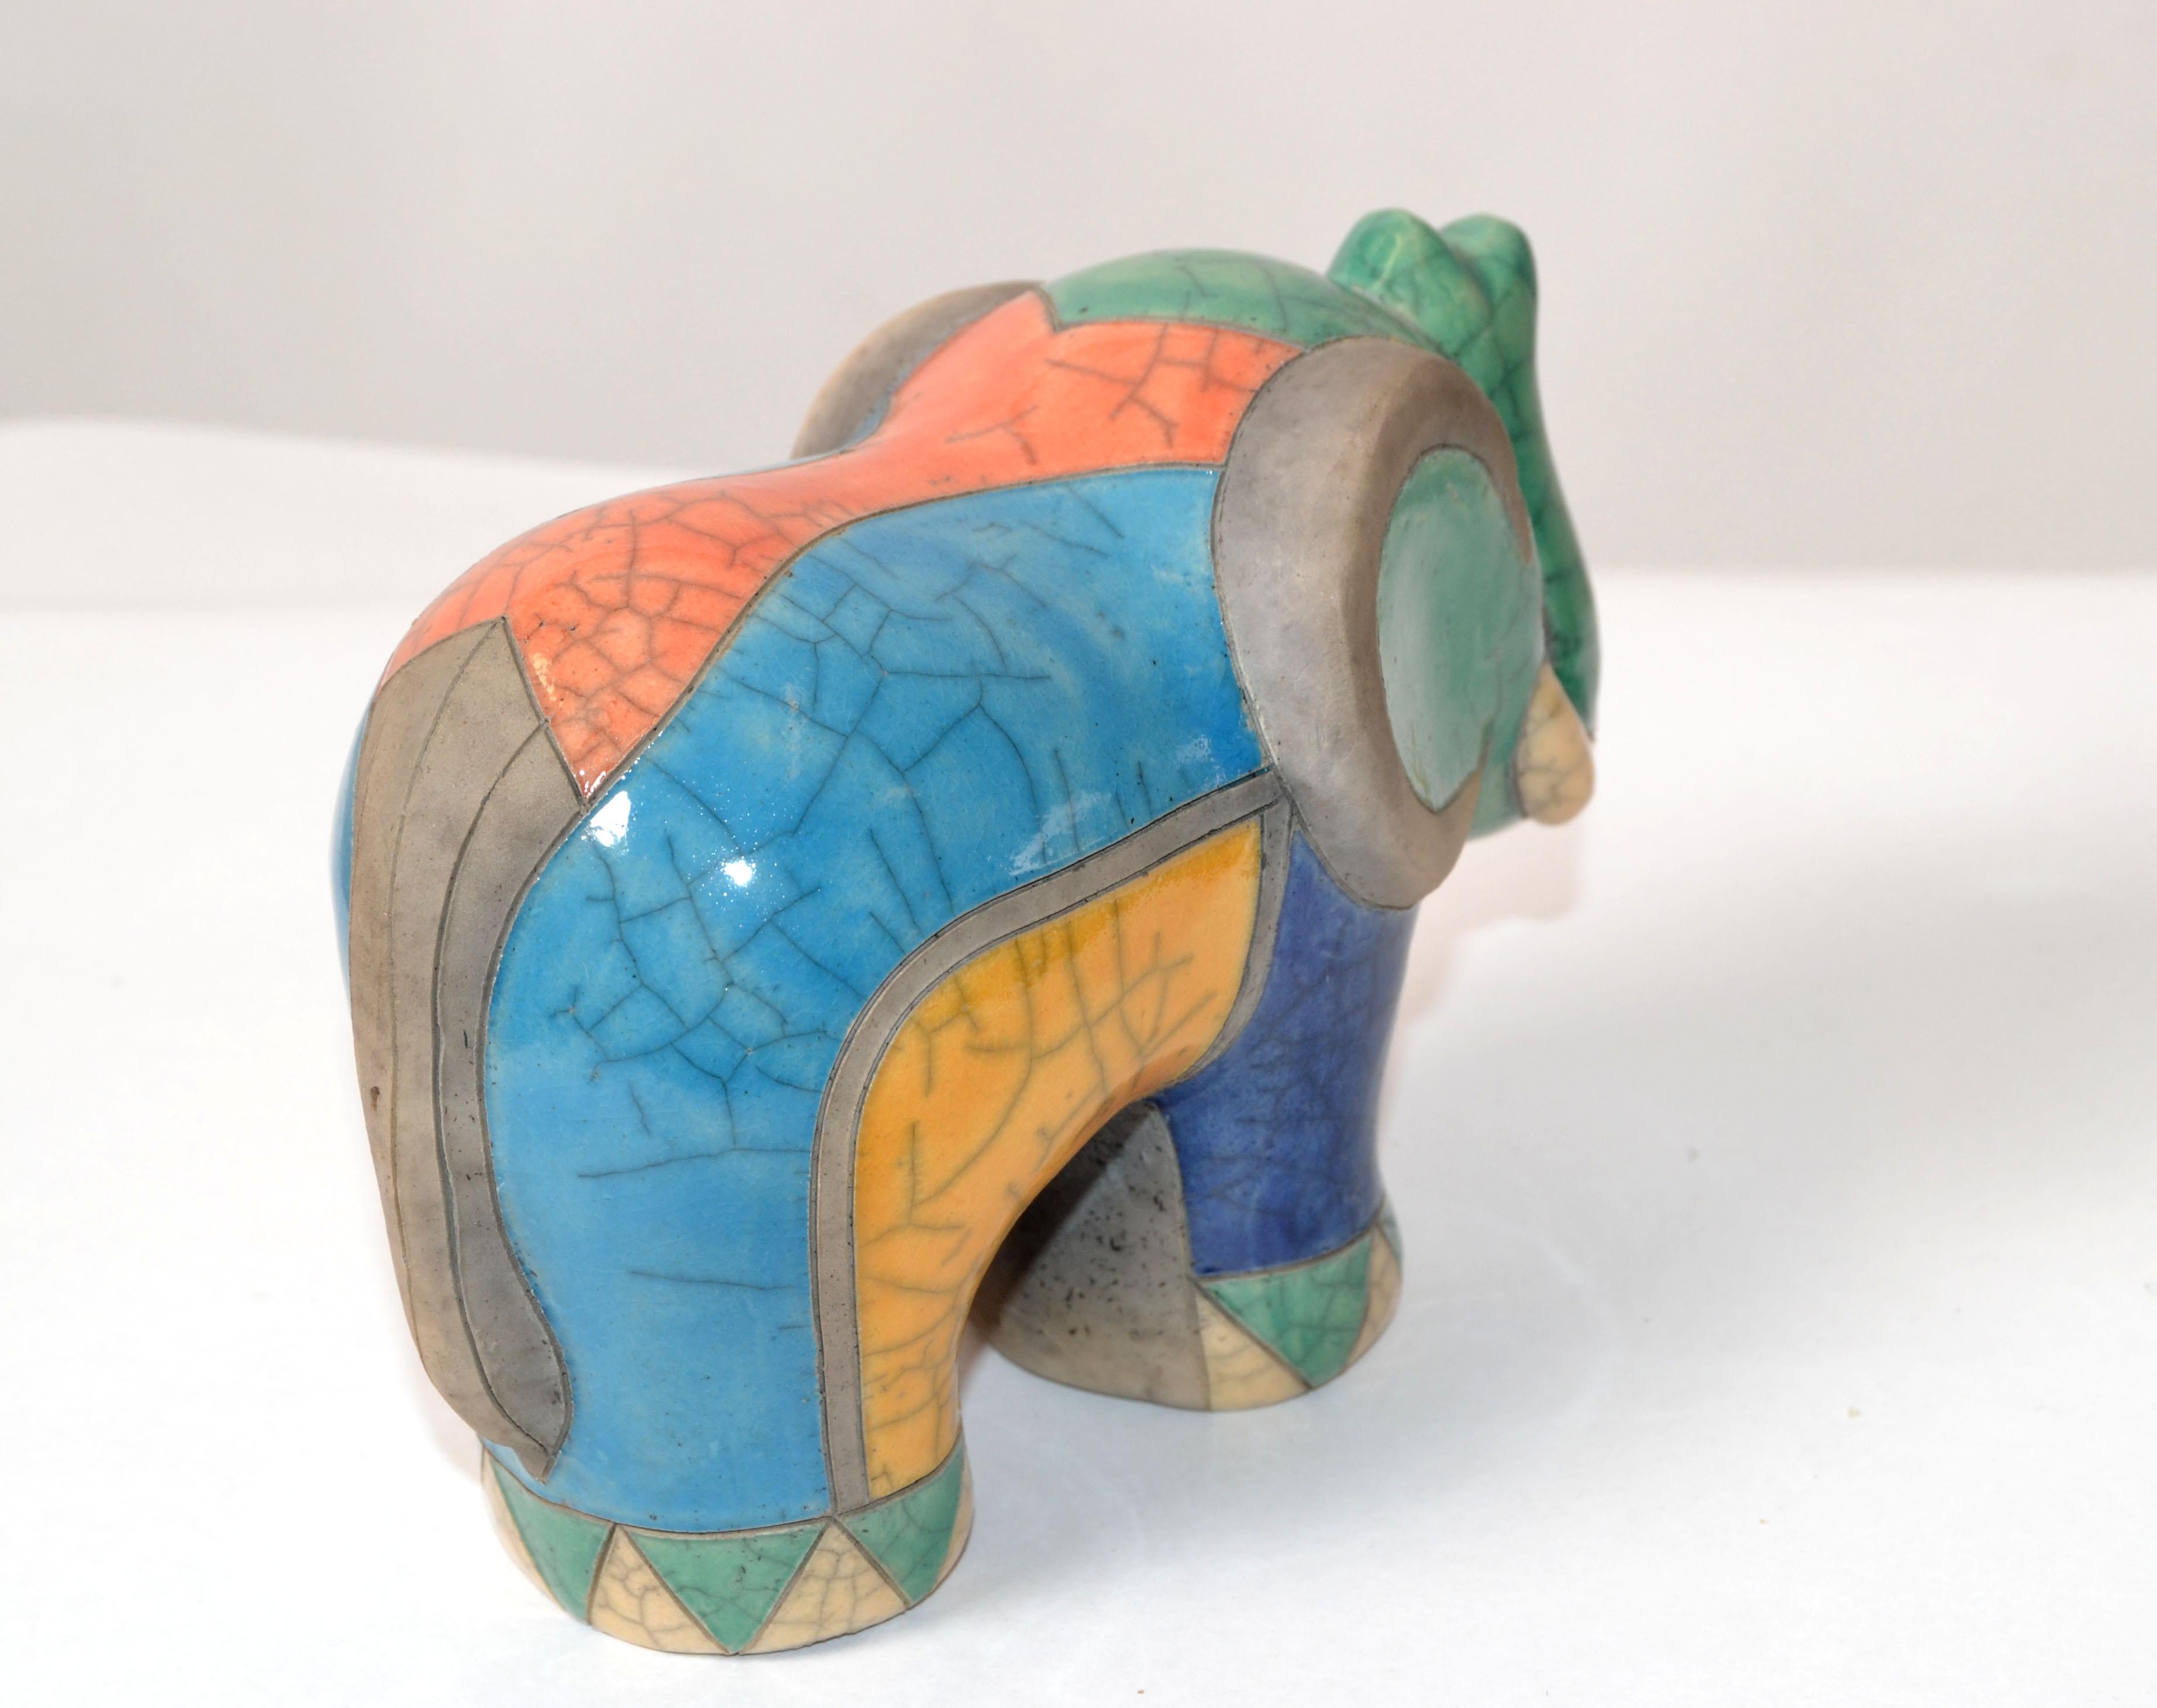 20th Century Luca CL Marked Colorful Ceramic Elephant Sculpture Mid-Century Modern Italy 1970 For Sale